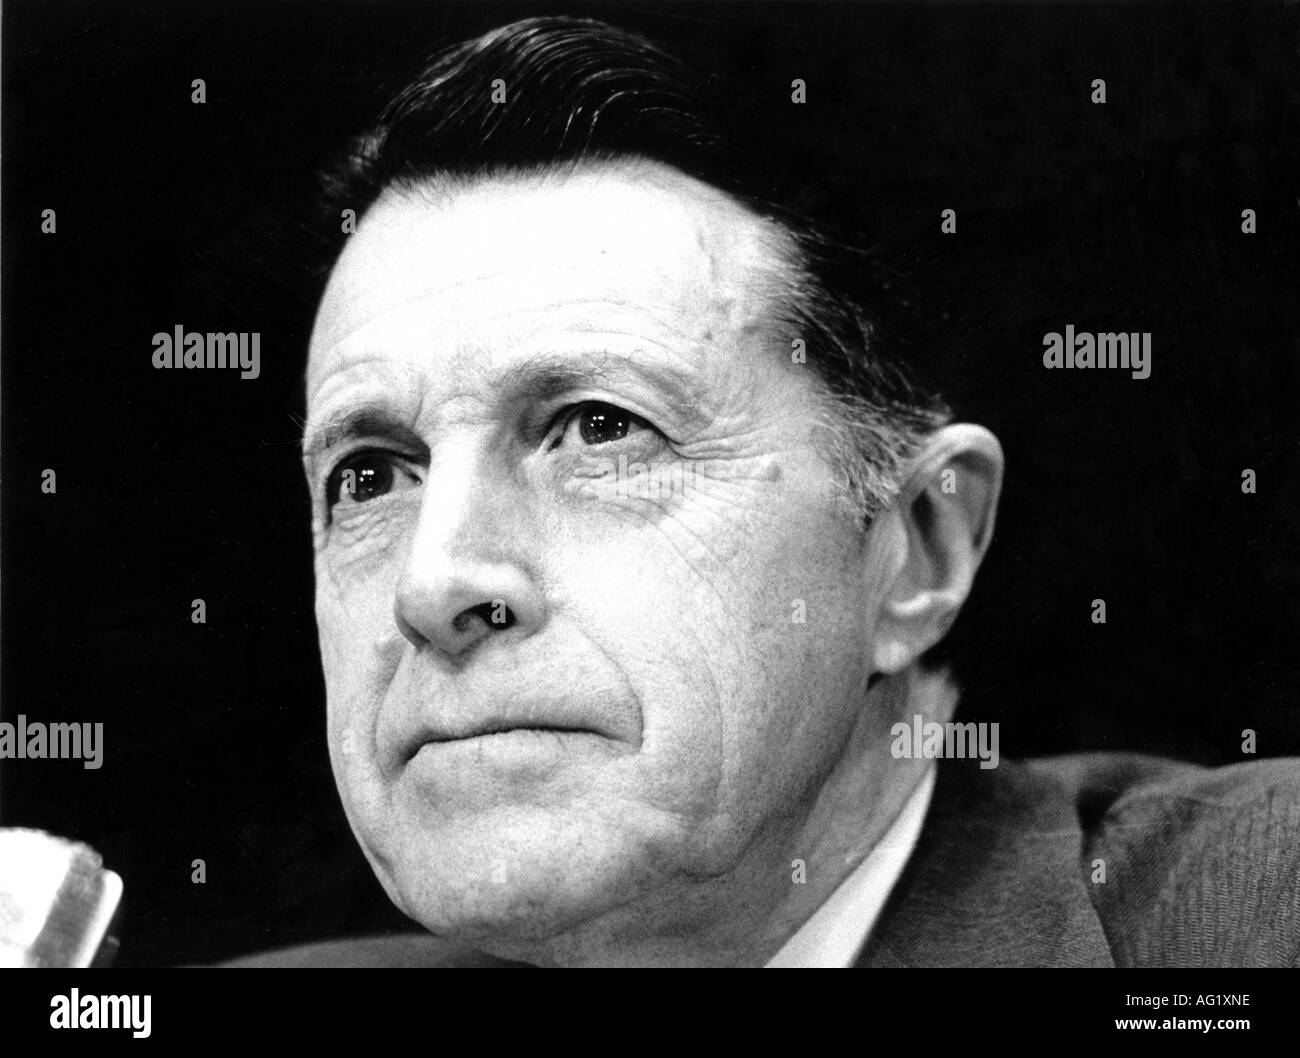 Weinberger, Caspar Willard 'Cap', 18.8.1917 - 28.3.2006, American politician, Secretary of State for Defense, portrait, at conference of nuclear planning group, Würzburg, 19.3.1986 - 21.3.1986, Stock Photo